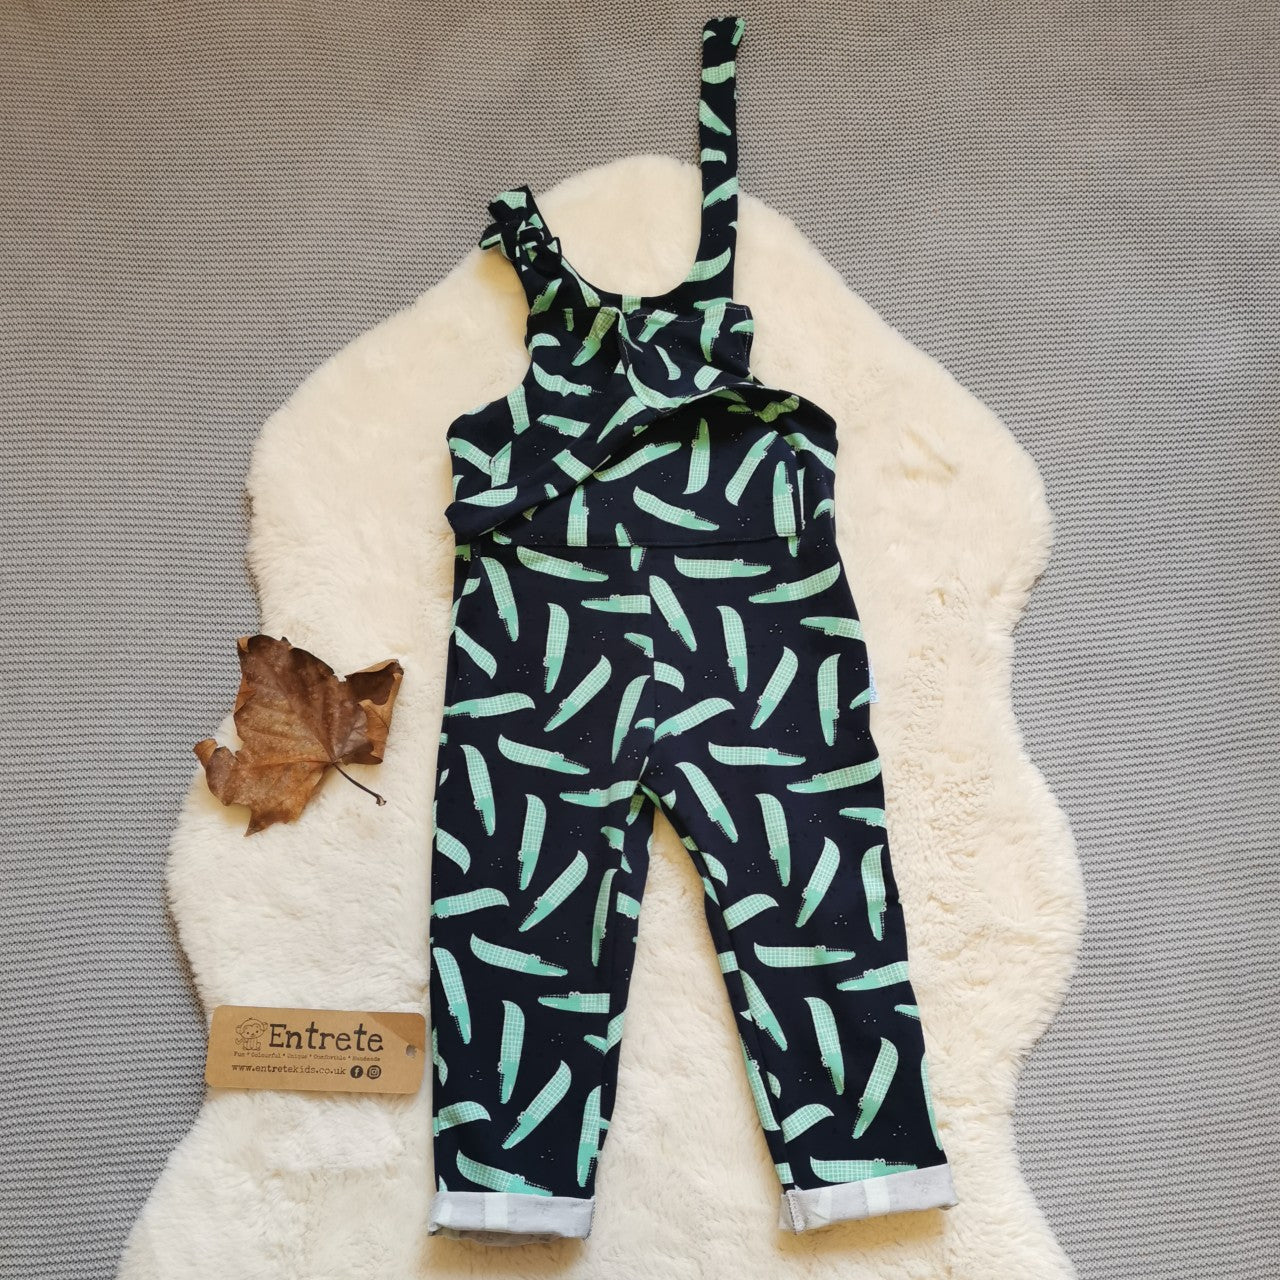 The amazingly fun navy crocodiles tie strap dungarees, handmade using navy crocodiles cotton jersey. Featuring a front pocket, rolled ankles and adjustable tie straps. Shown with one strap undone. 